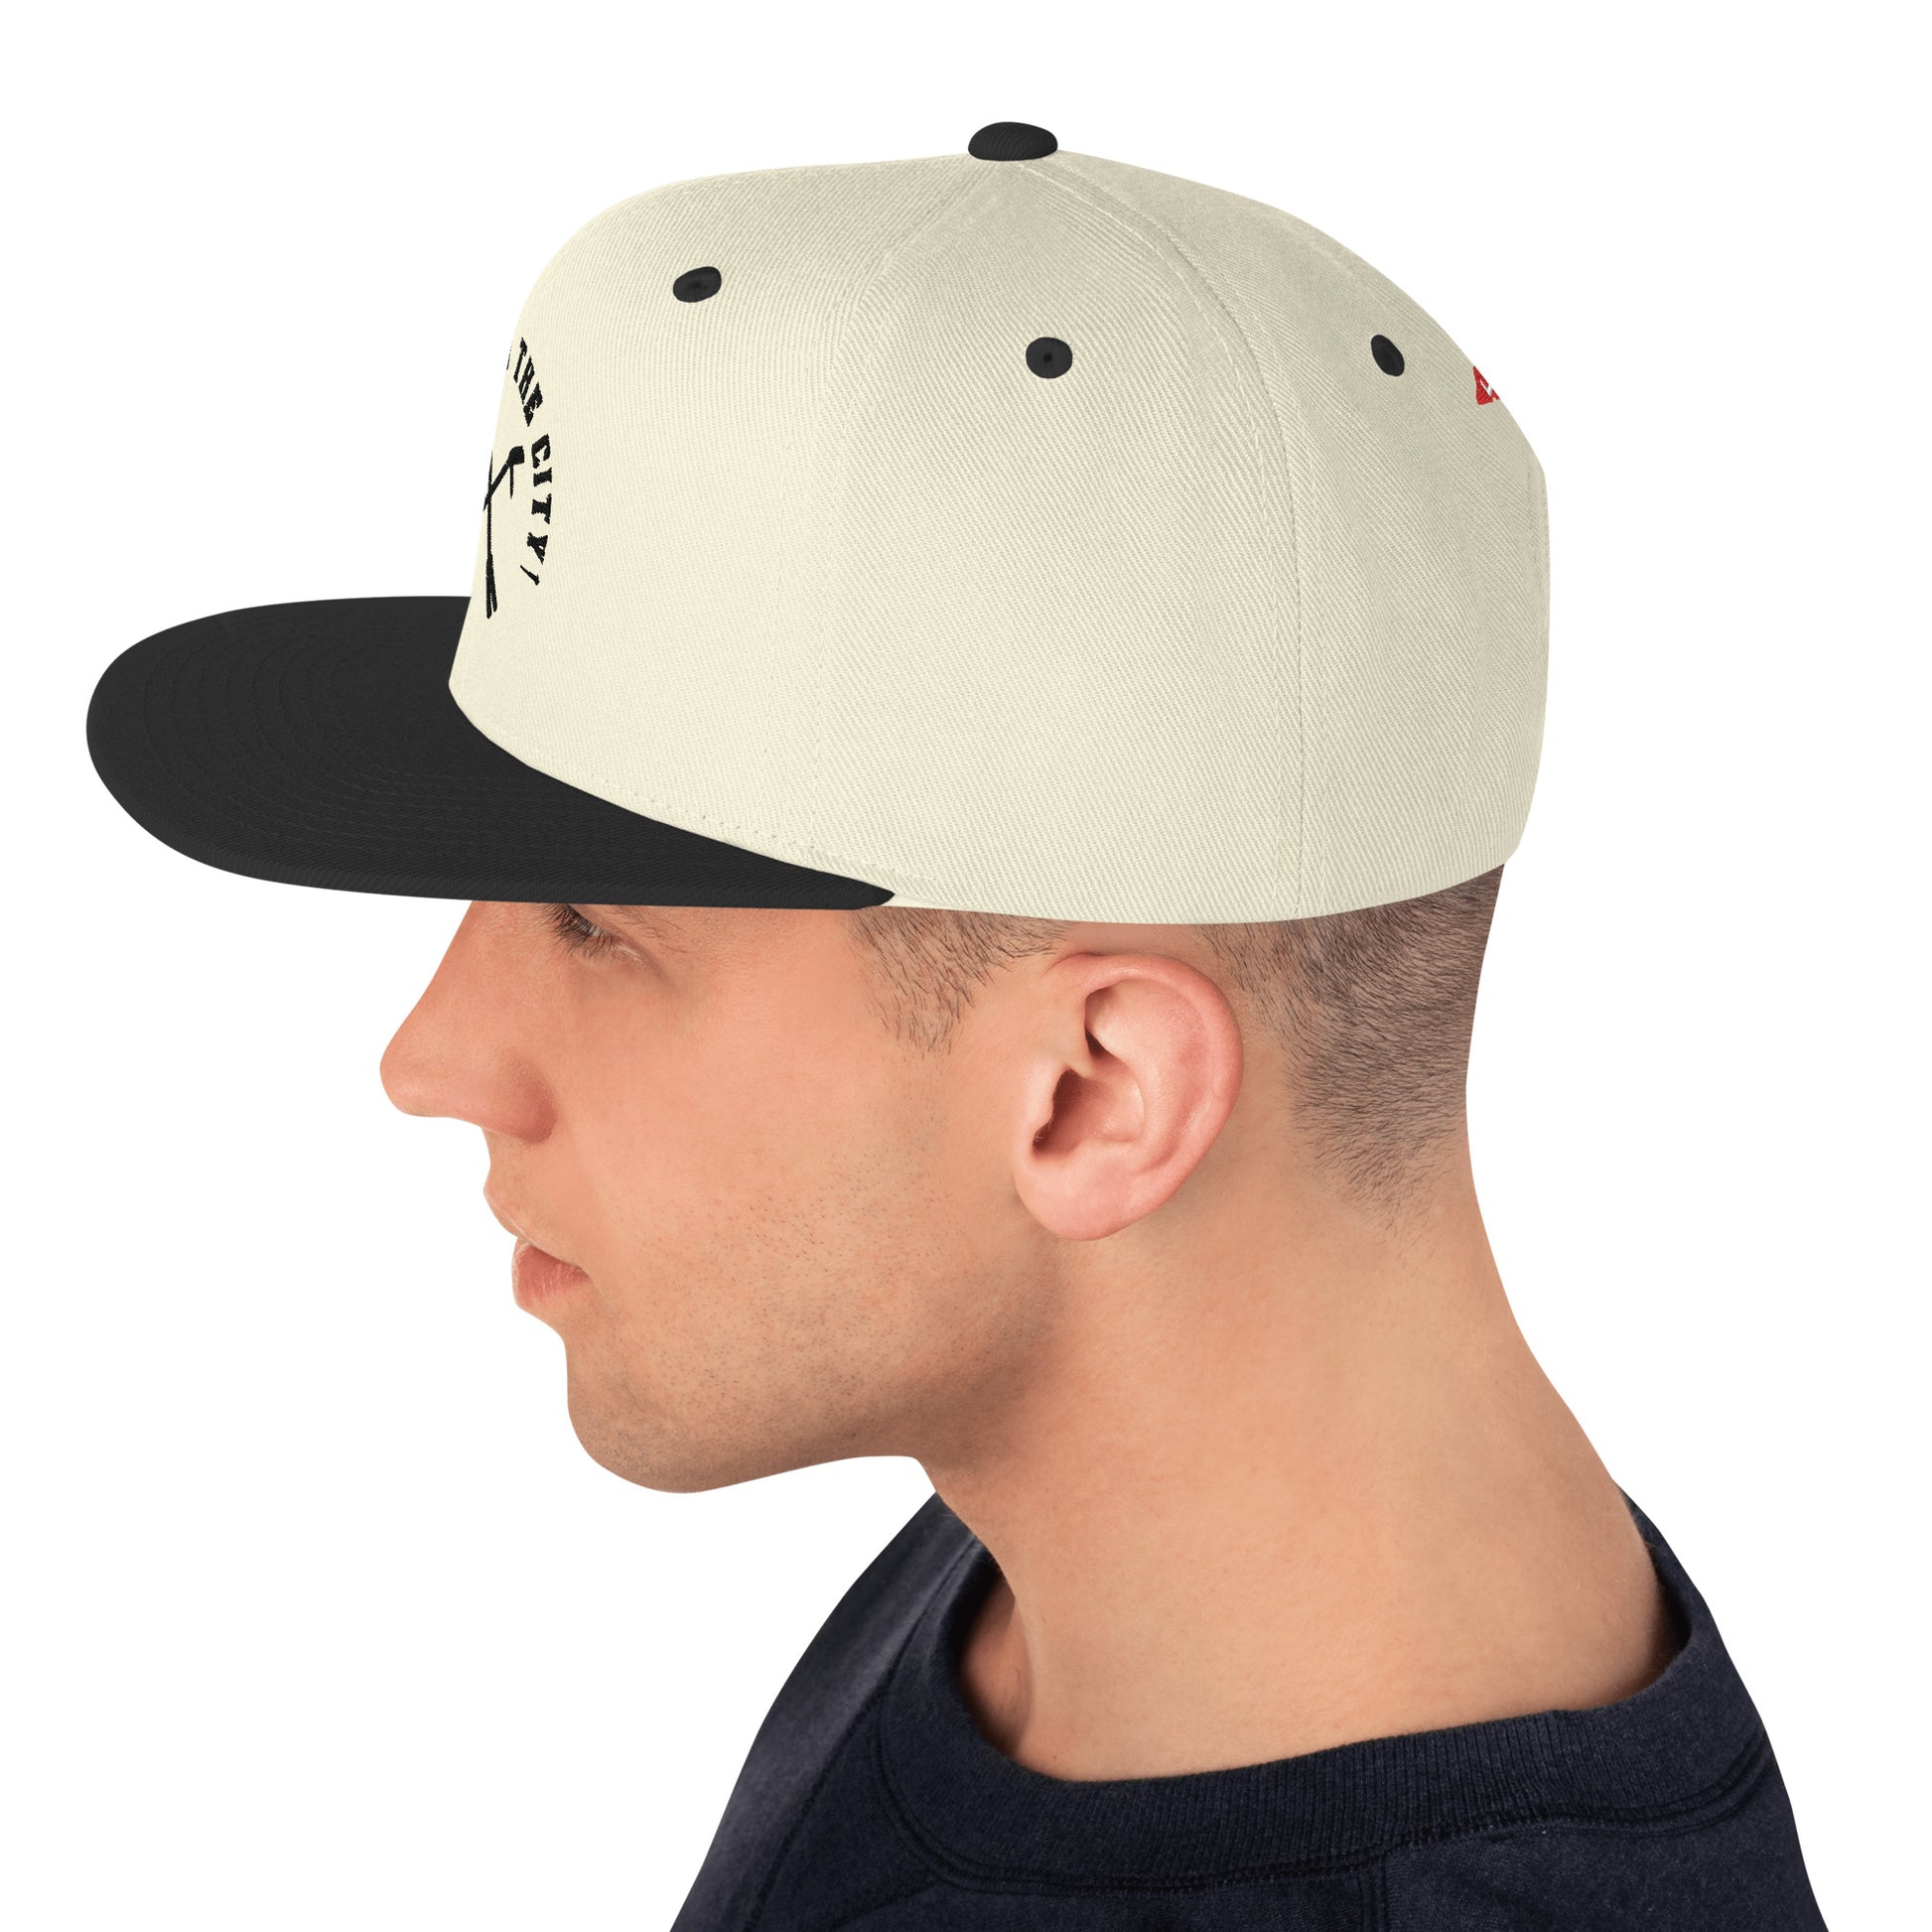 Natural and Black Keys to the City, Halligan Bar classic snapback hat for firefighters